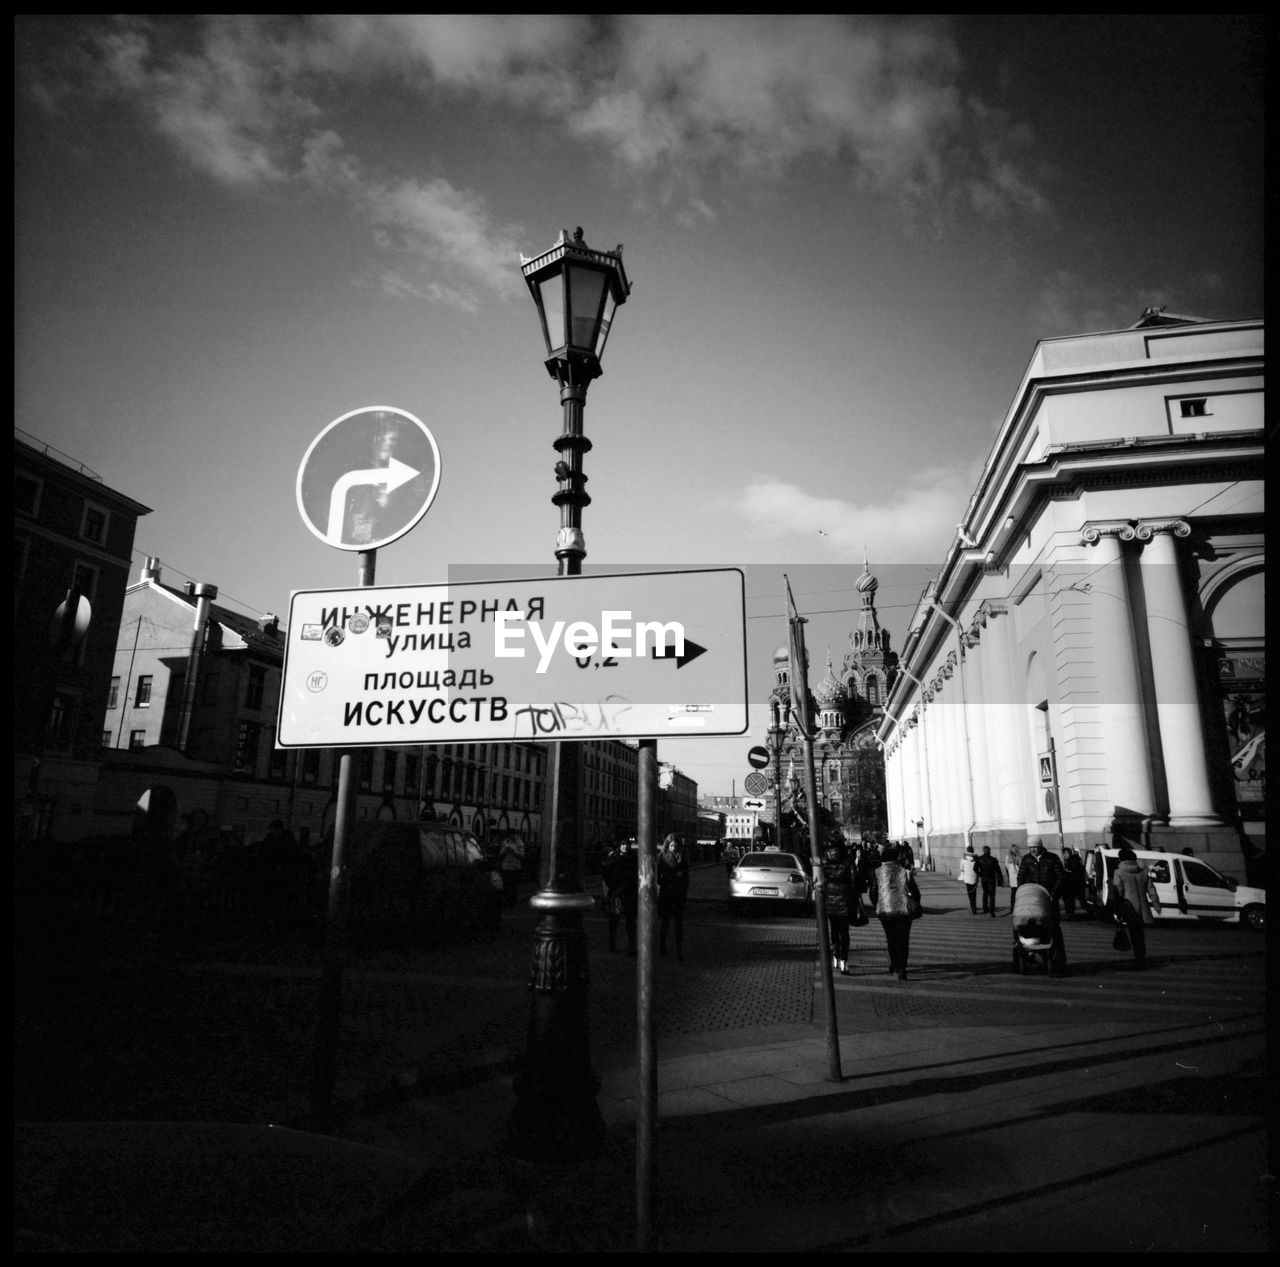 Saviour on the spilled blood Analogue Photography Architecture Belief Cathedral Christian Church Czar Historic Lomography Medium Format Newa Onion Dome Orthodox Orthodox Church Orthodoxy Outdoors Place Of Worship Religion Saint Petersburg Saint Petersburg, Russia Saviour On The Spilled Blood Sky Slide Tradition Trip